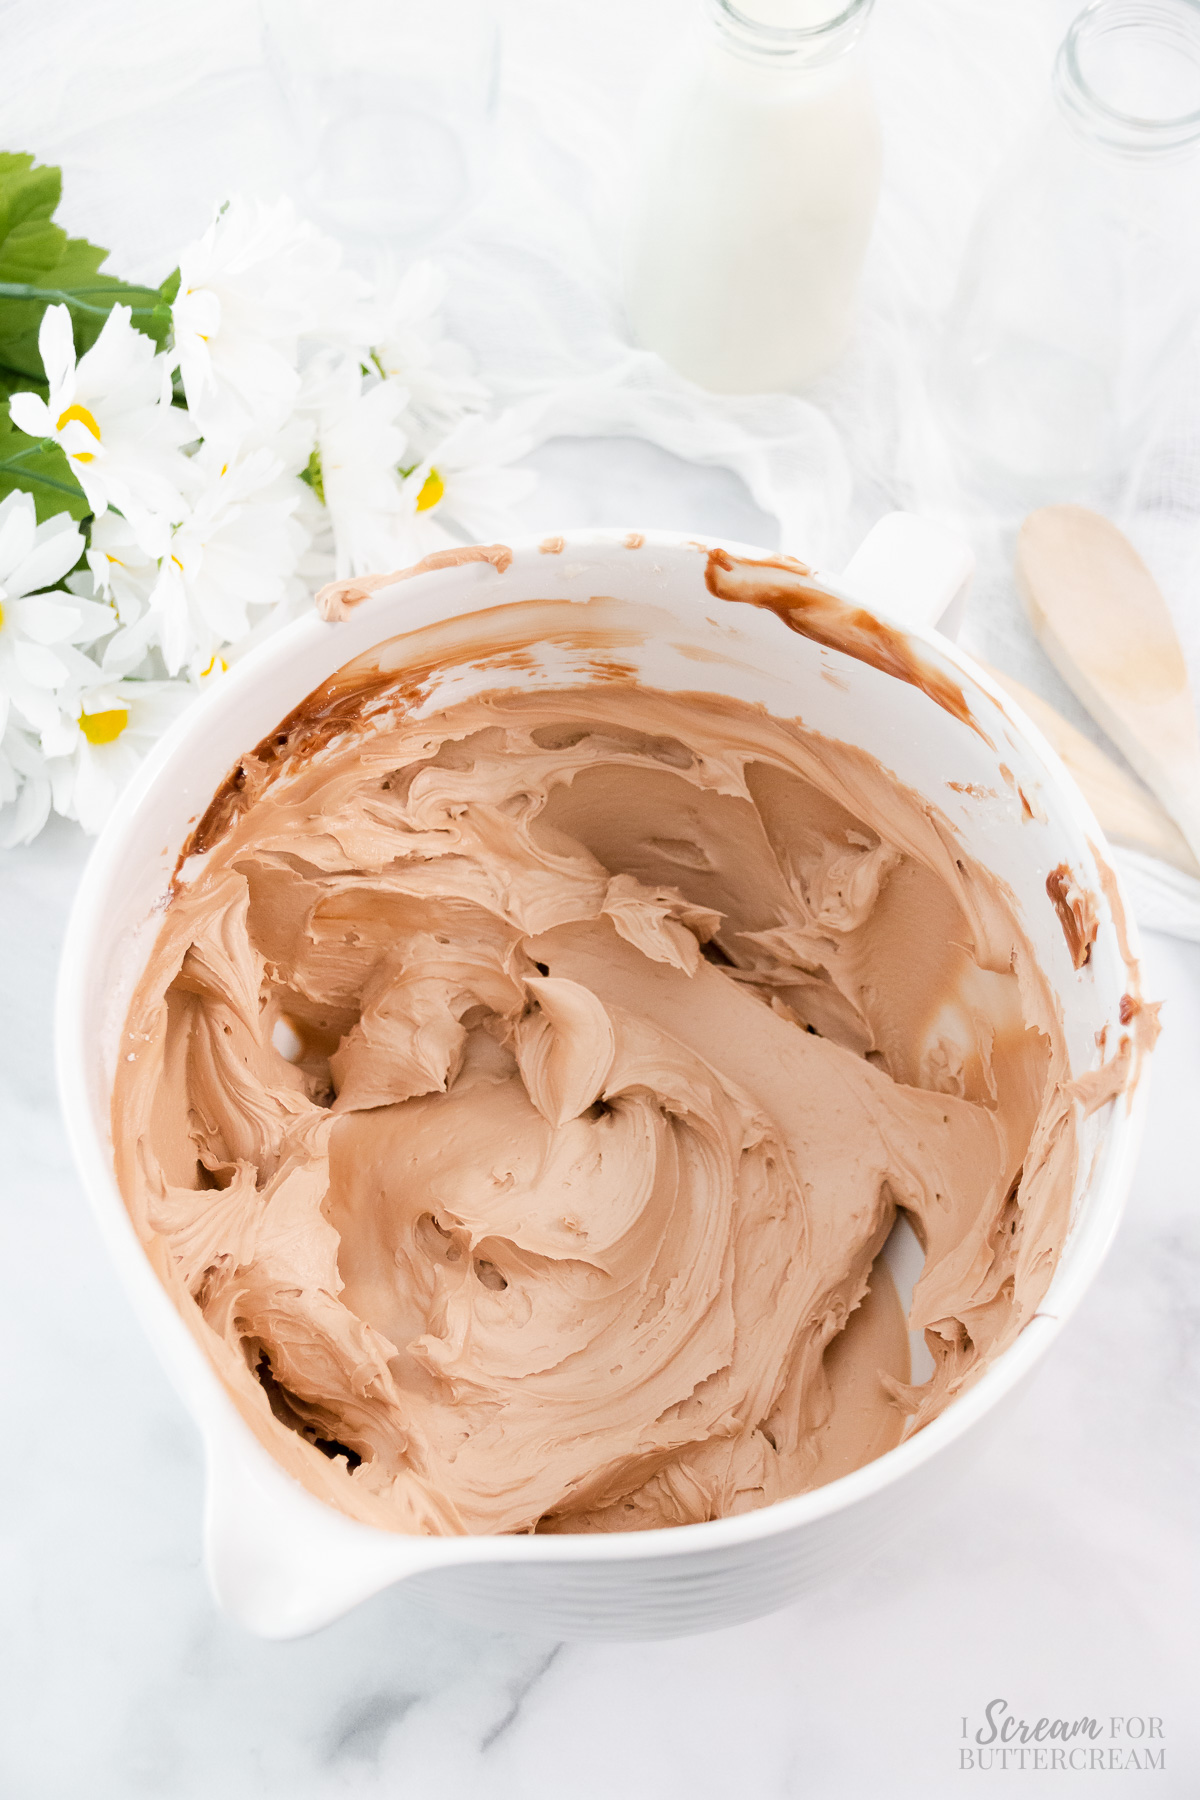 Milk chocolate icing mixed in a large white bowl.